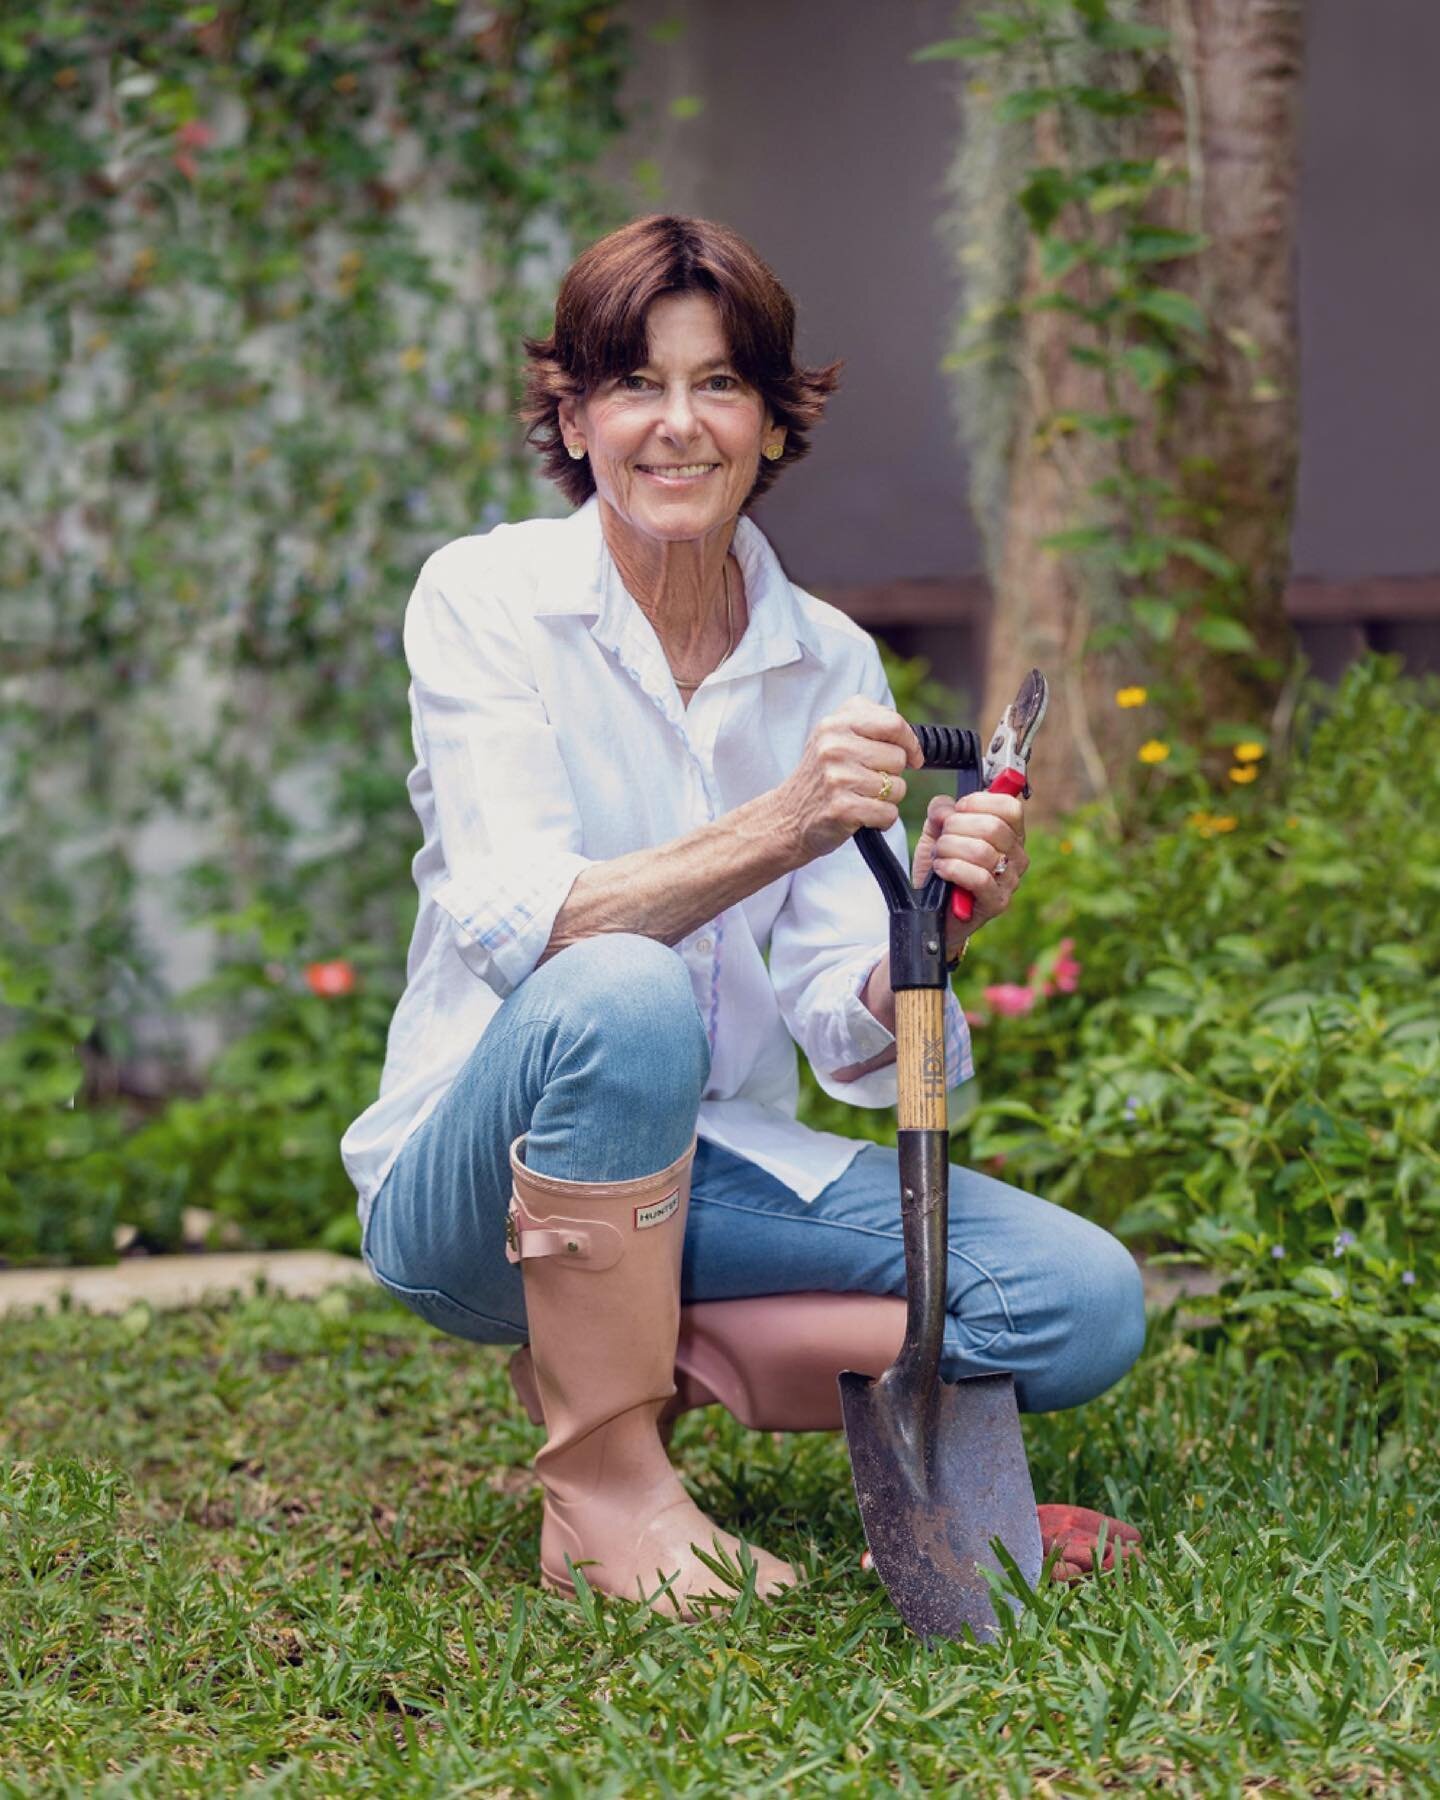 Meet Kim Frisbie. Kim writes for the Palm Beach Daily News about sustainable native plantings in South Florida&rsquo;s landscape. She has a BA in English with a minor in Horticulture from Smith College and an MS in Ornamental Horticulture from the Lo